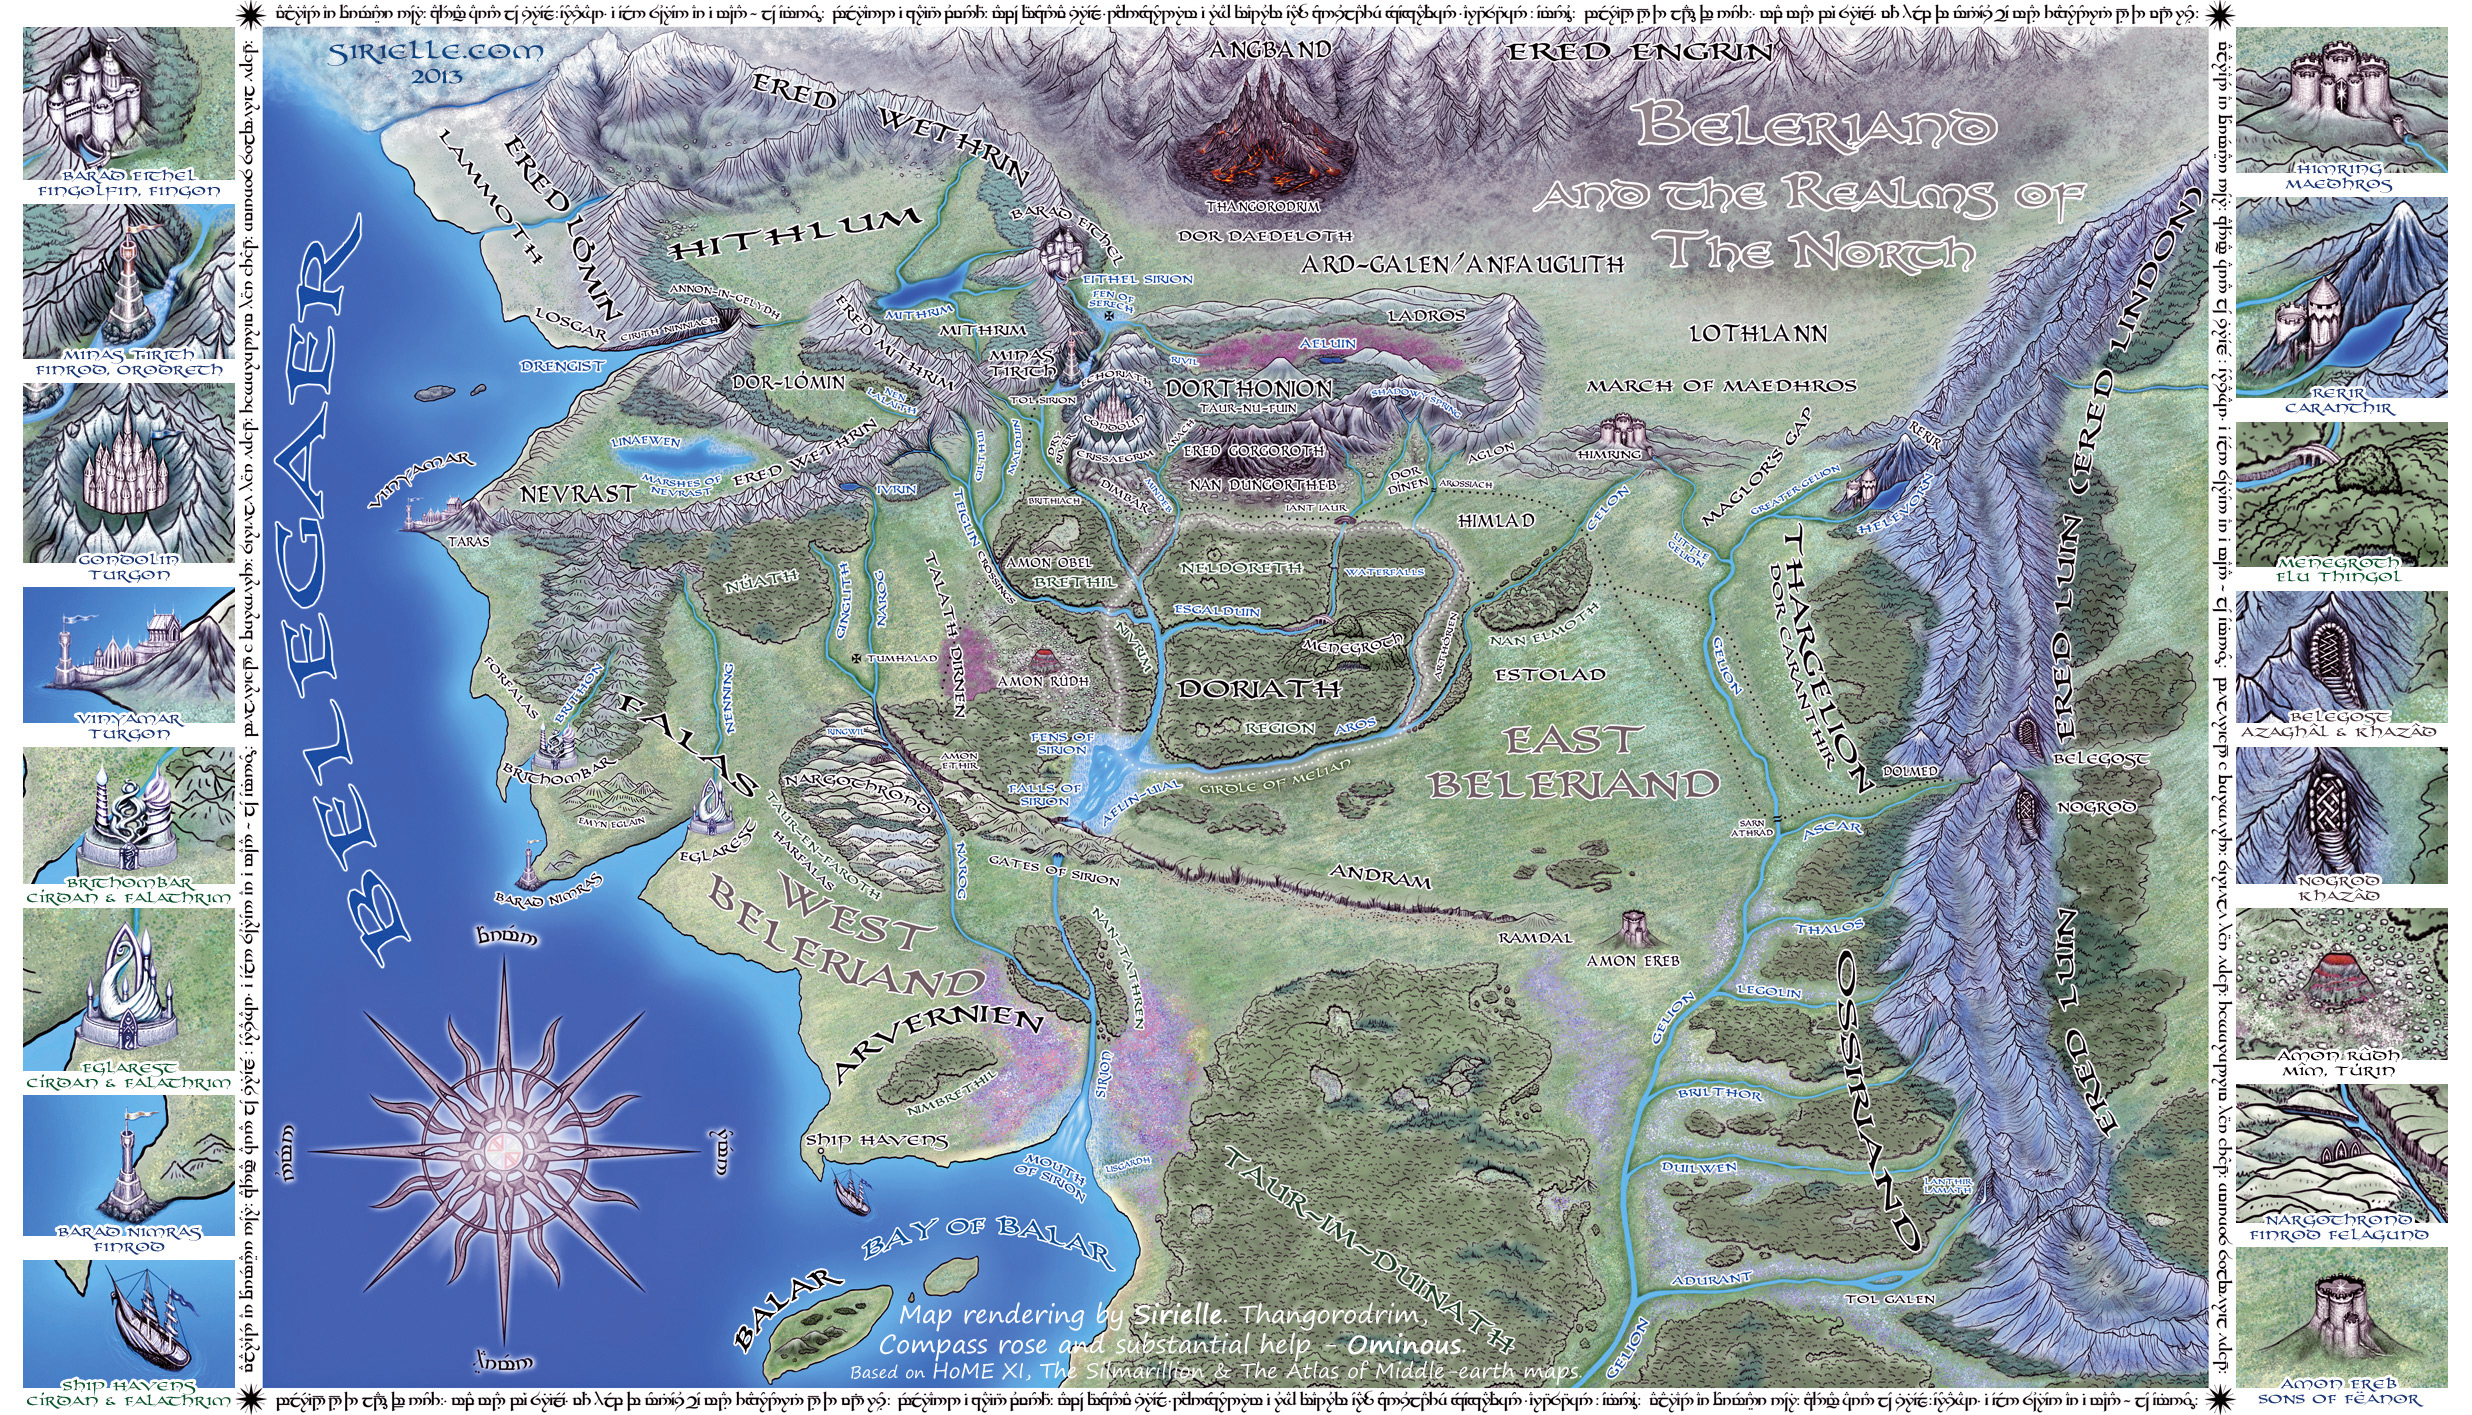 Beleriand and the Realms of the North by Sirielle